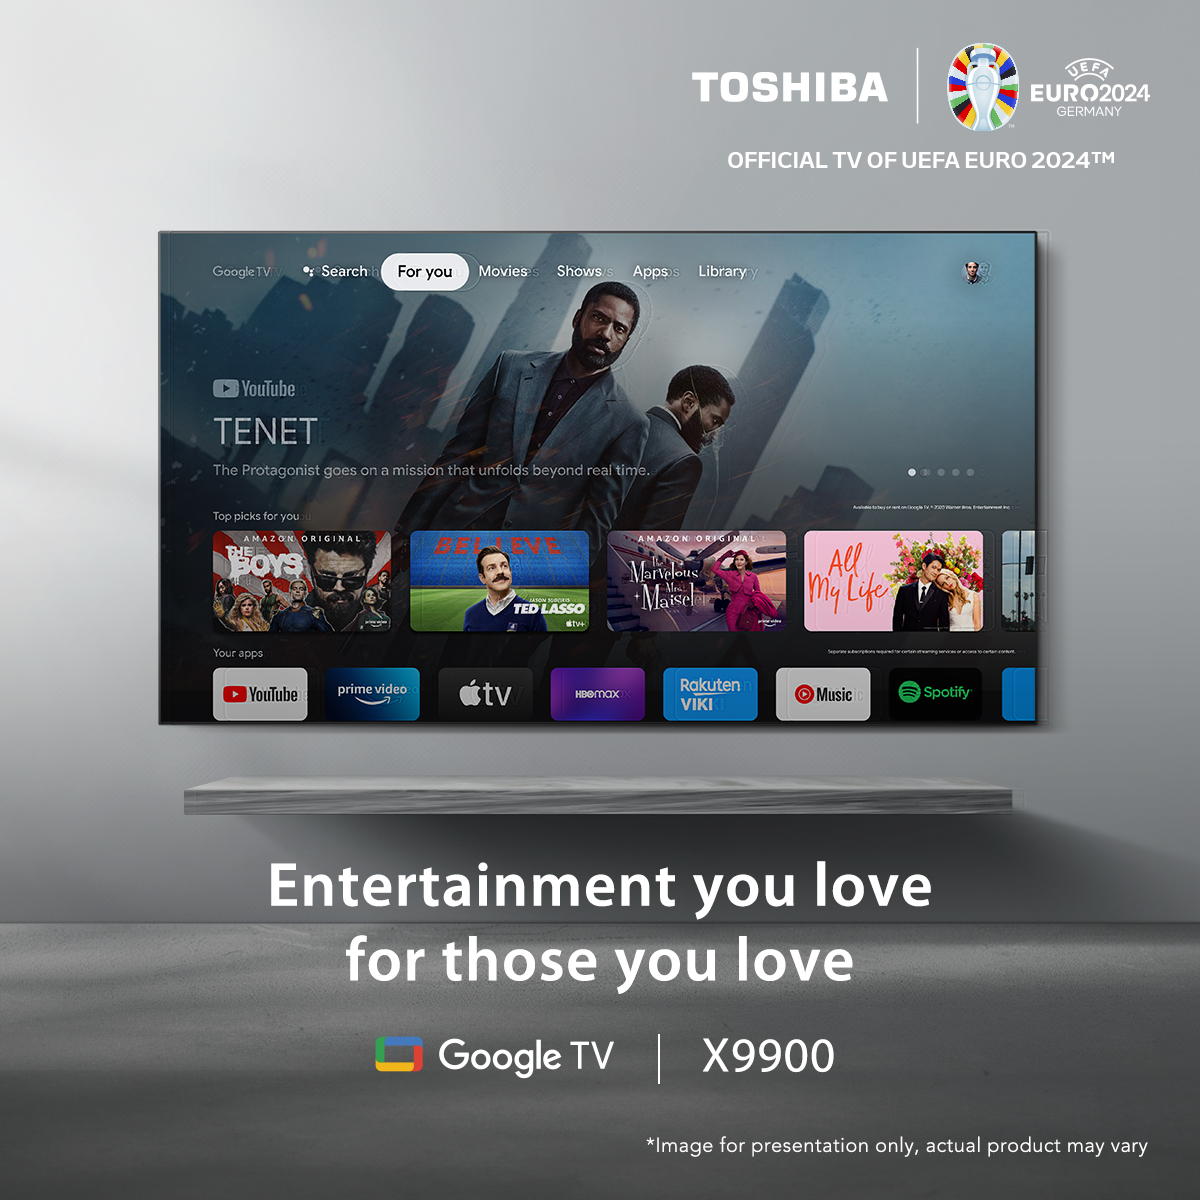 Turn family nights from obligatory to extraordinary with Android #ToshibaTV. Dive into 400,000+ movies and shows, discover new favourites with voice search, and relive the nostalgia with Chromecast built-in. With content this good, quality time becomes the easy part.